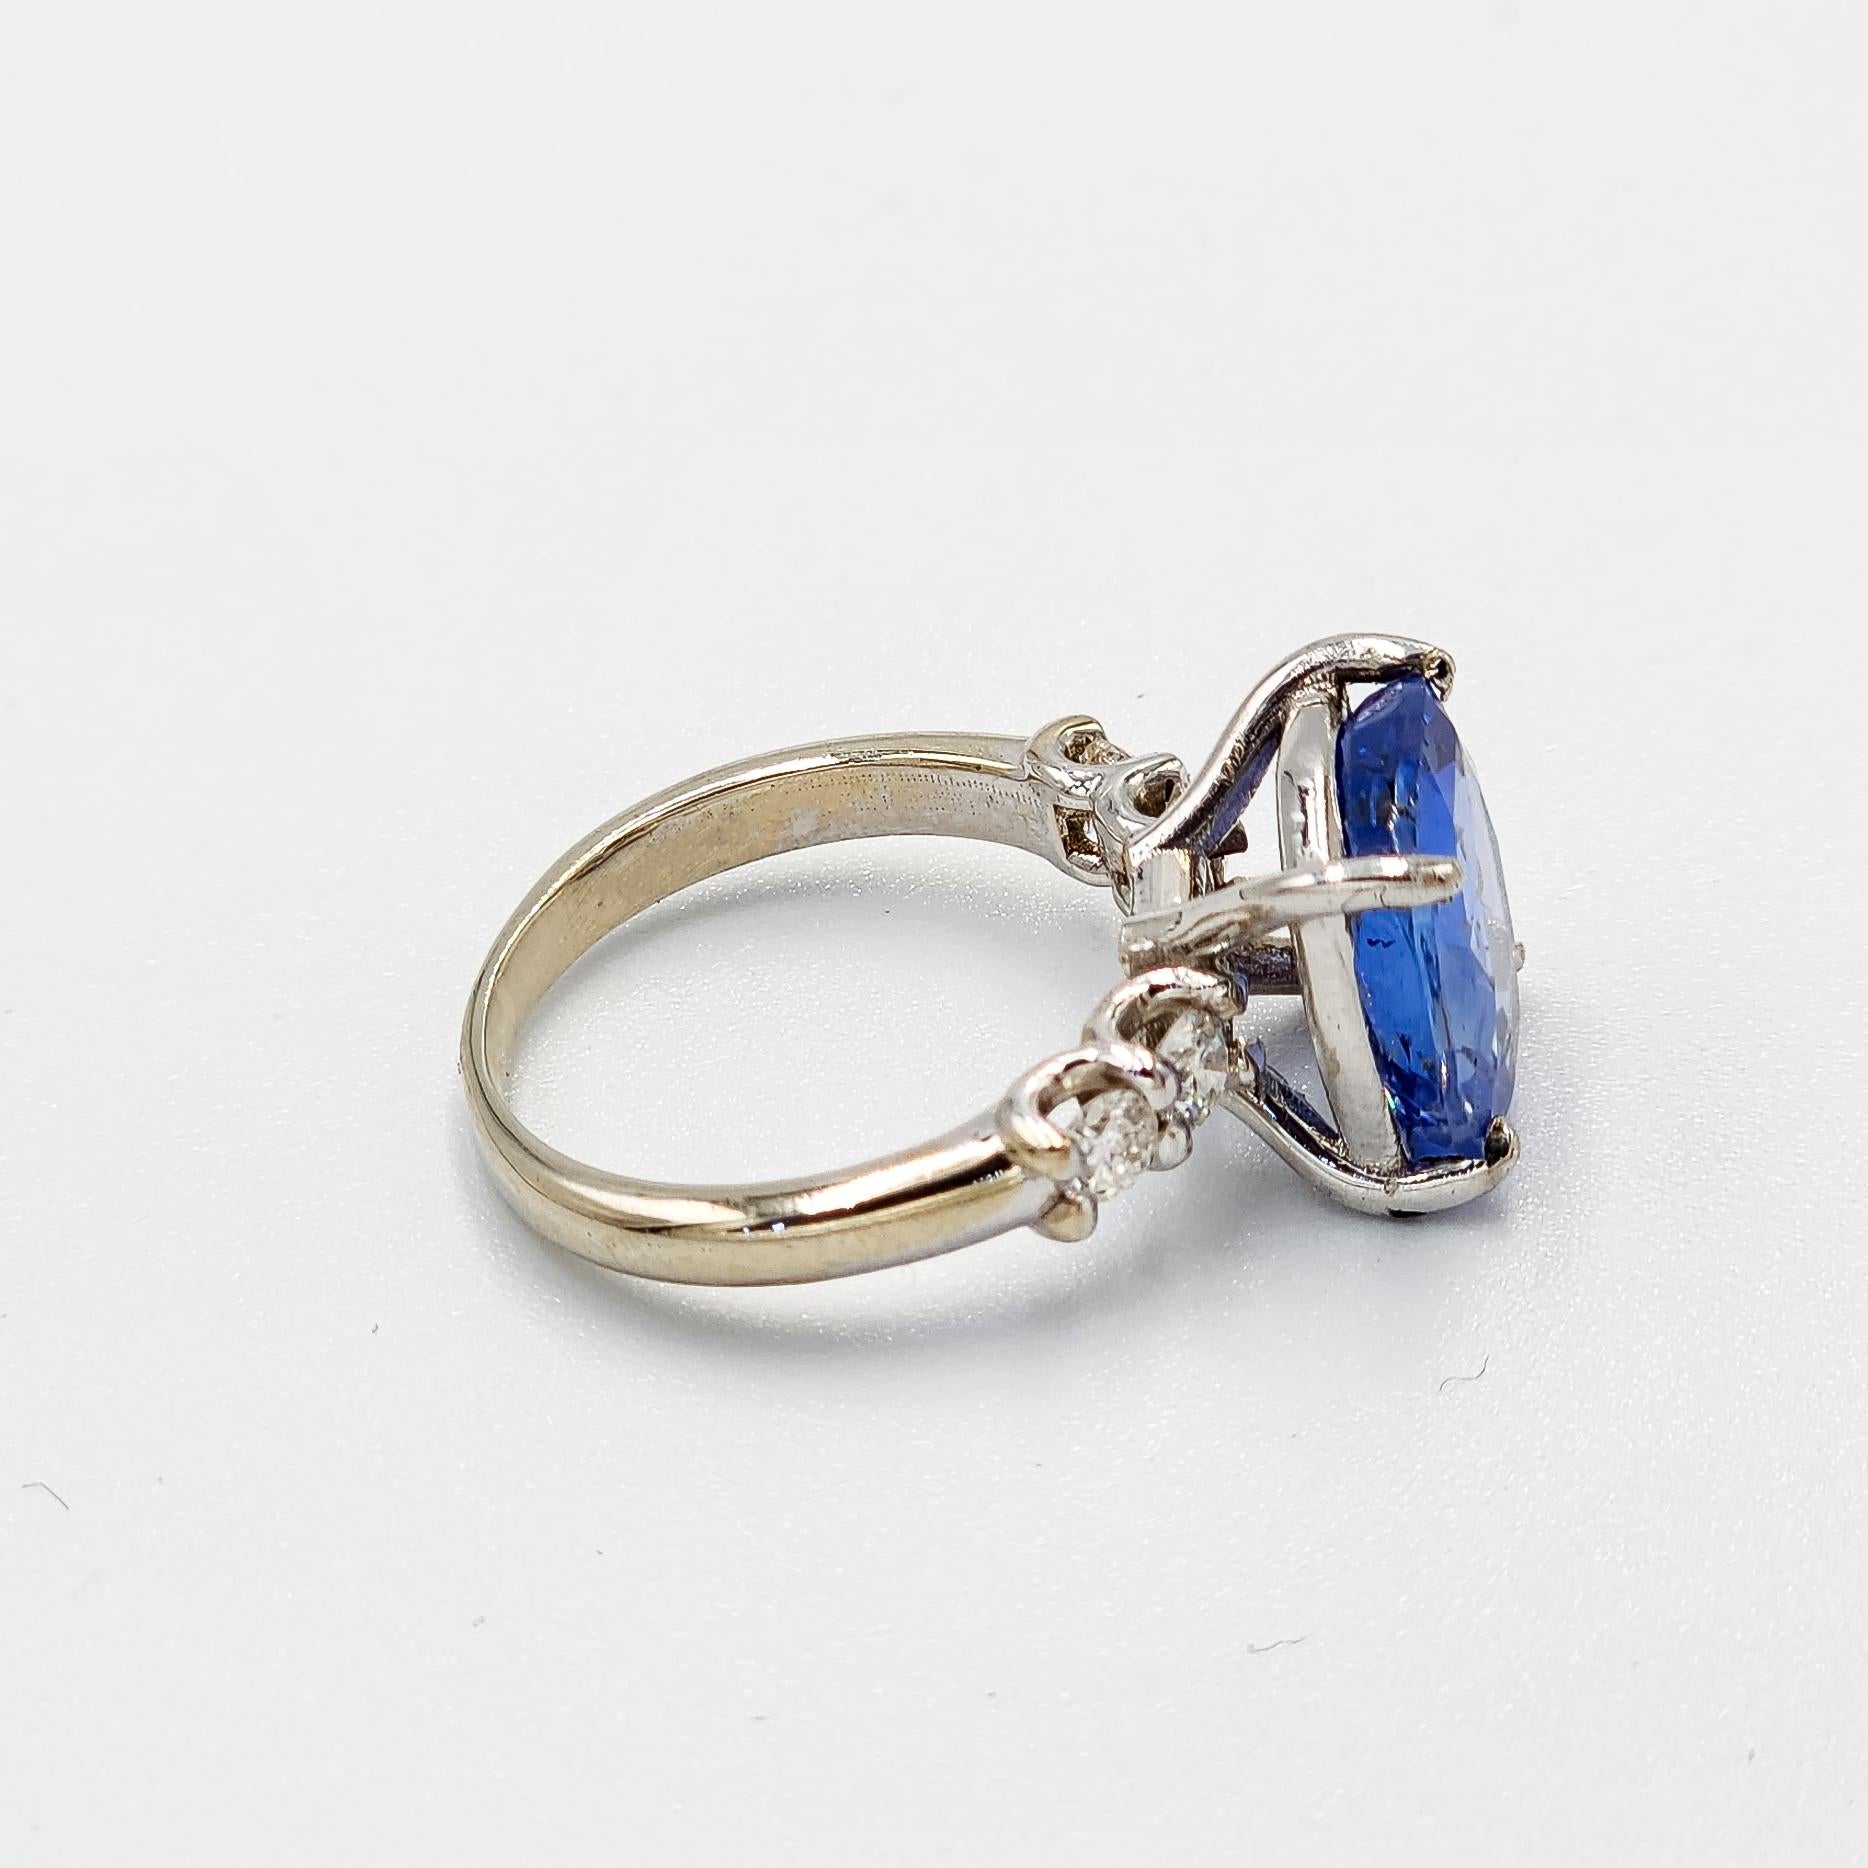 Cushion Cut GIA Certified 5.99 Carat Natural Blue Sapphire Ring with Diamonds in 14k gold For Sale